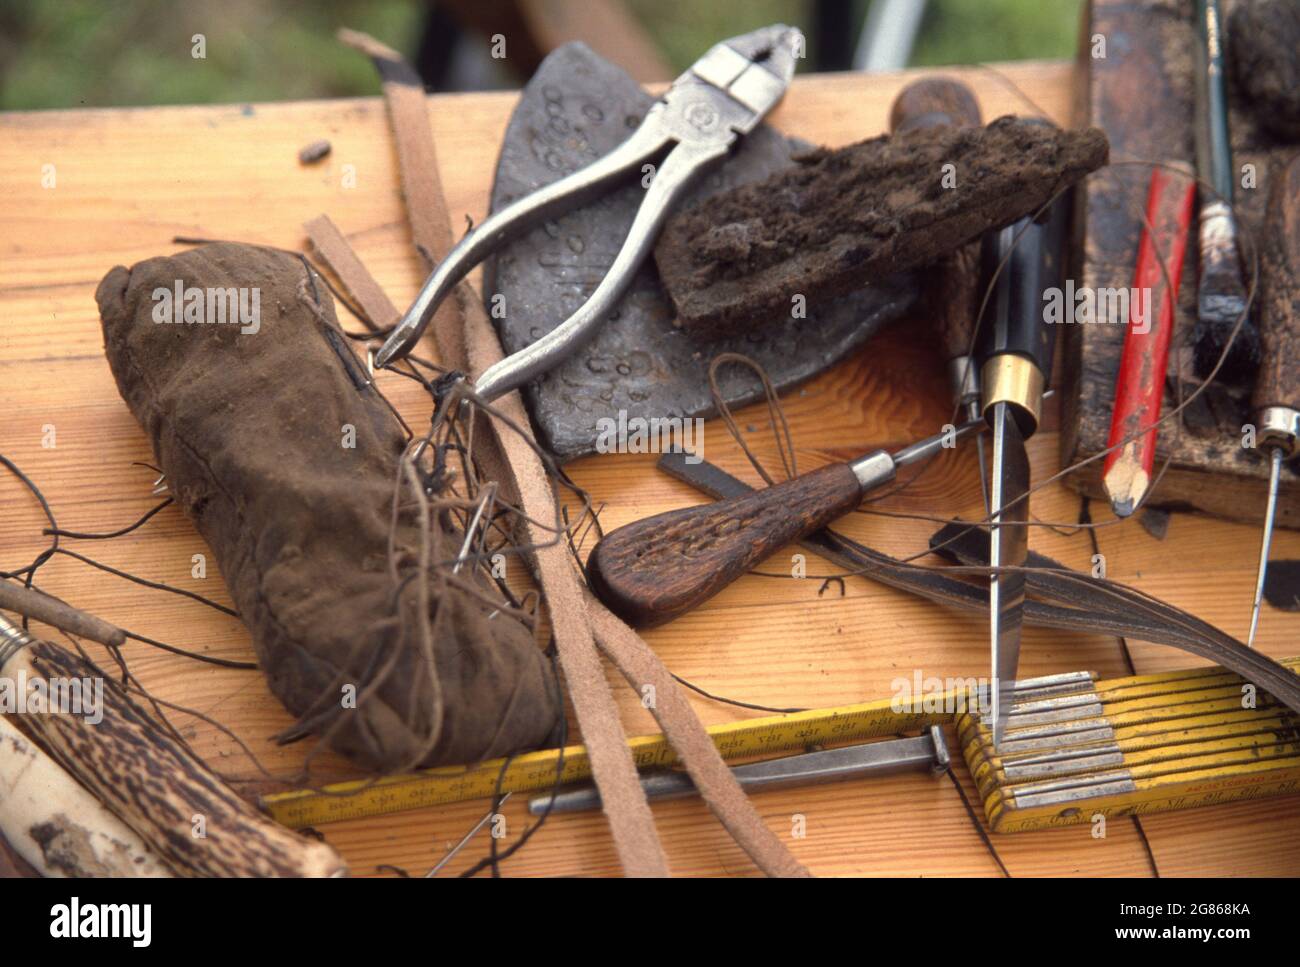 Handwork cutting leather and working  with old tools Stock Photo